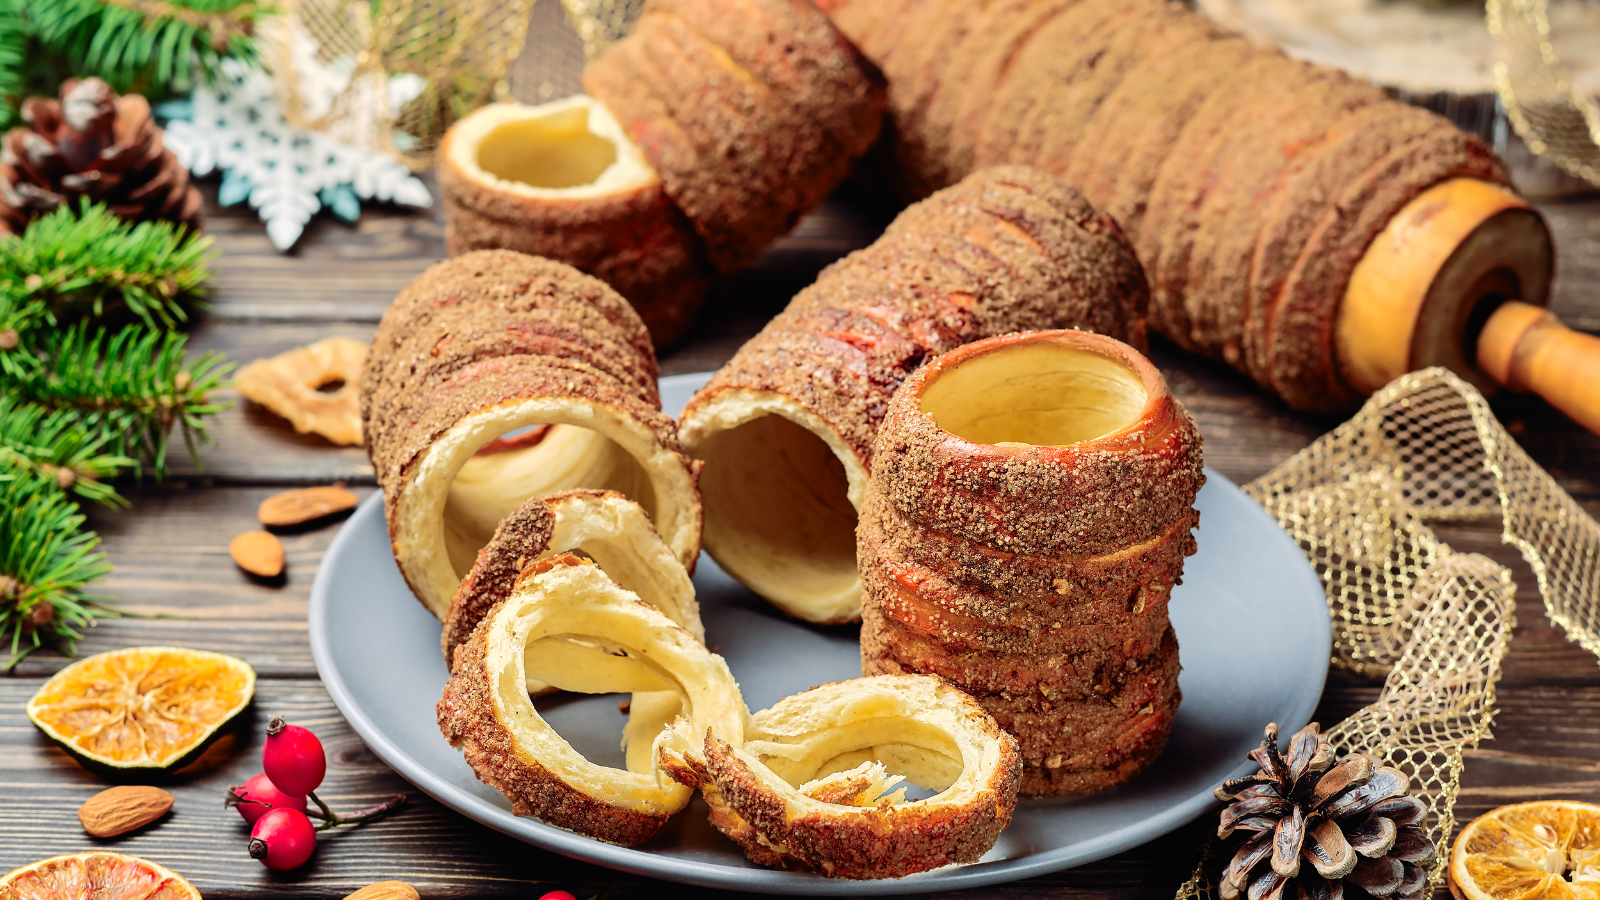 Enjoy a Trdelník - ninth thing in the list of 10 best things to do in the Czech Republic